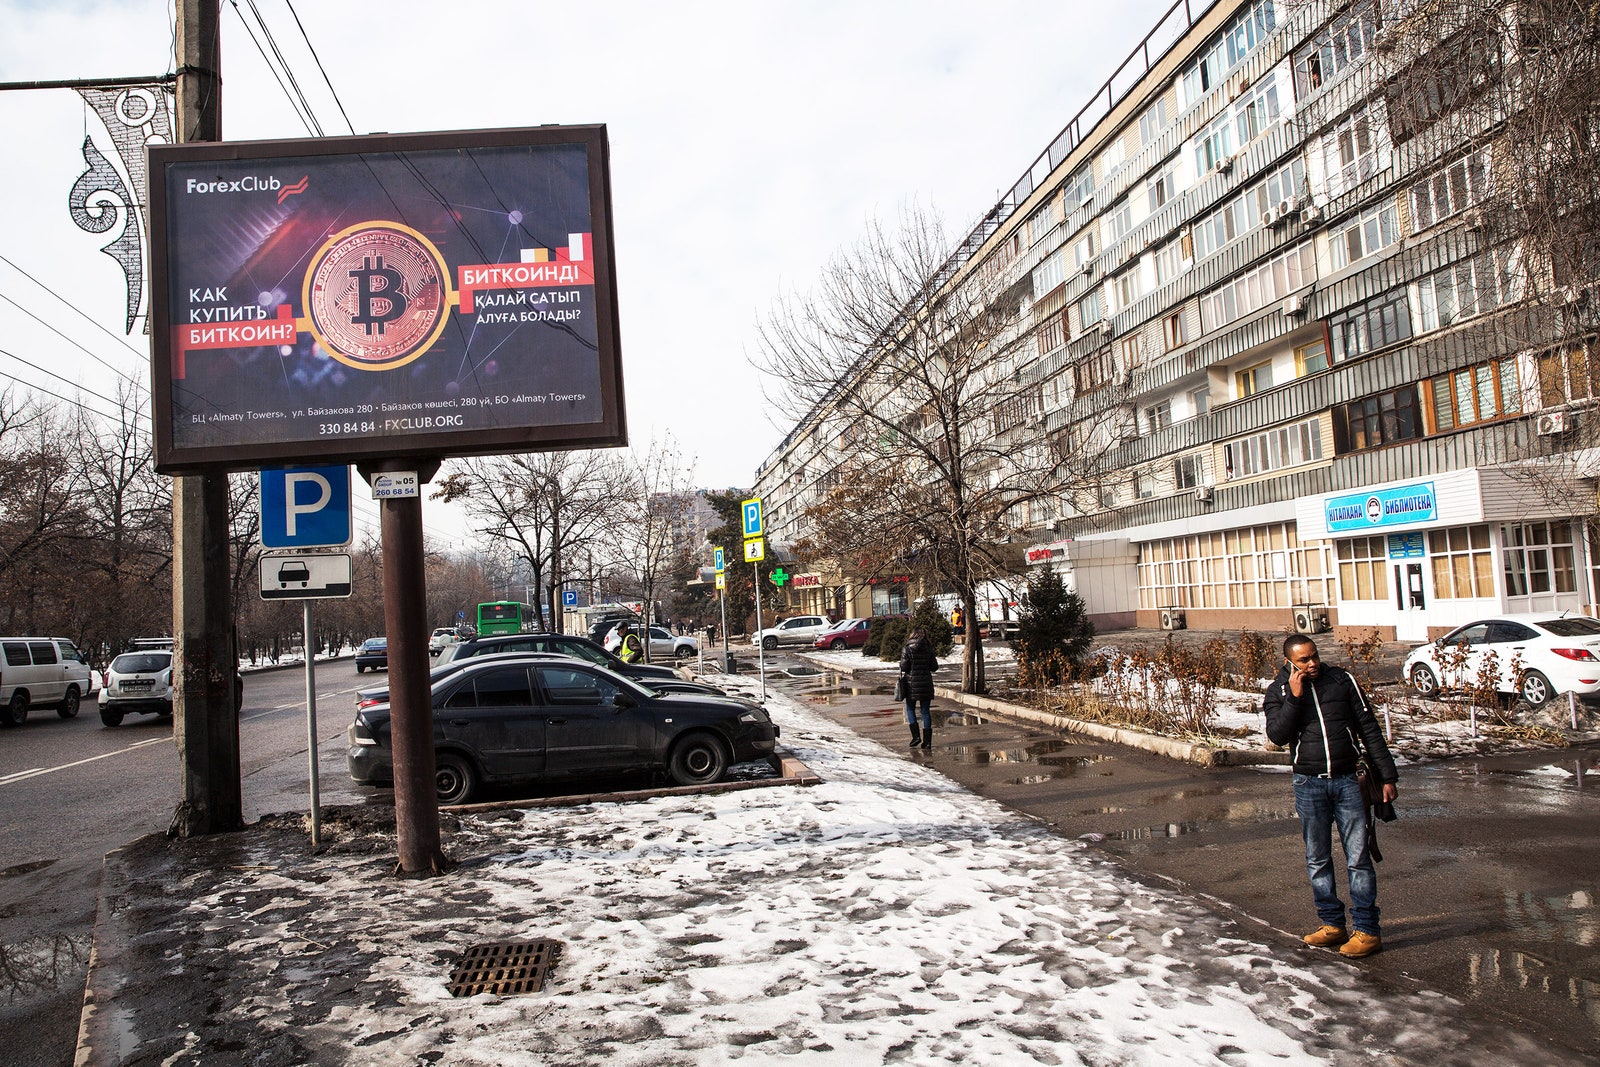 Man takes a phone call next to a Bitcoin billboard outside on a snowy day in Kazakhstan